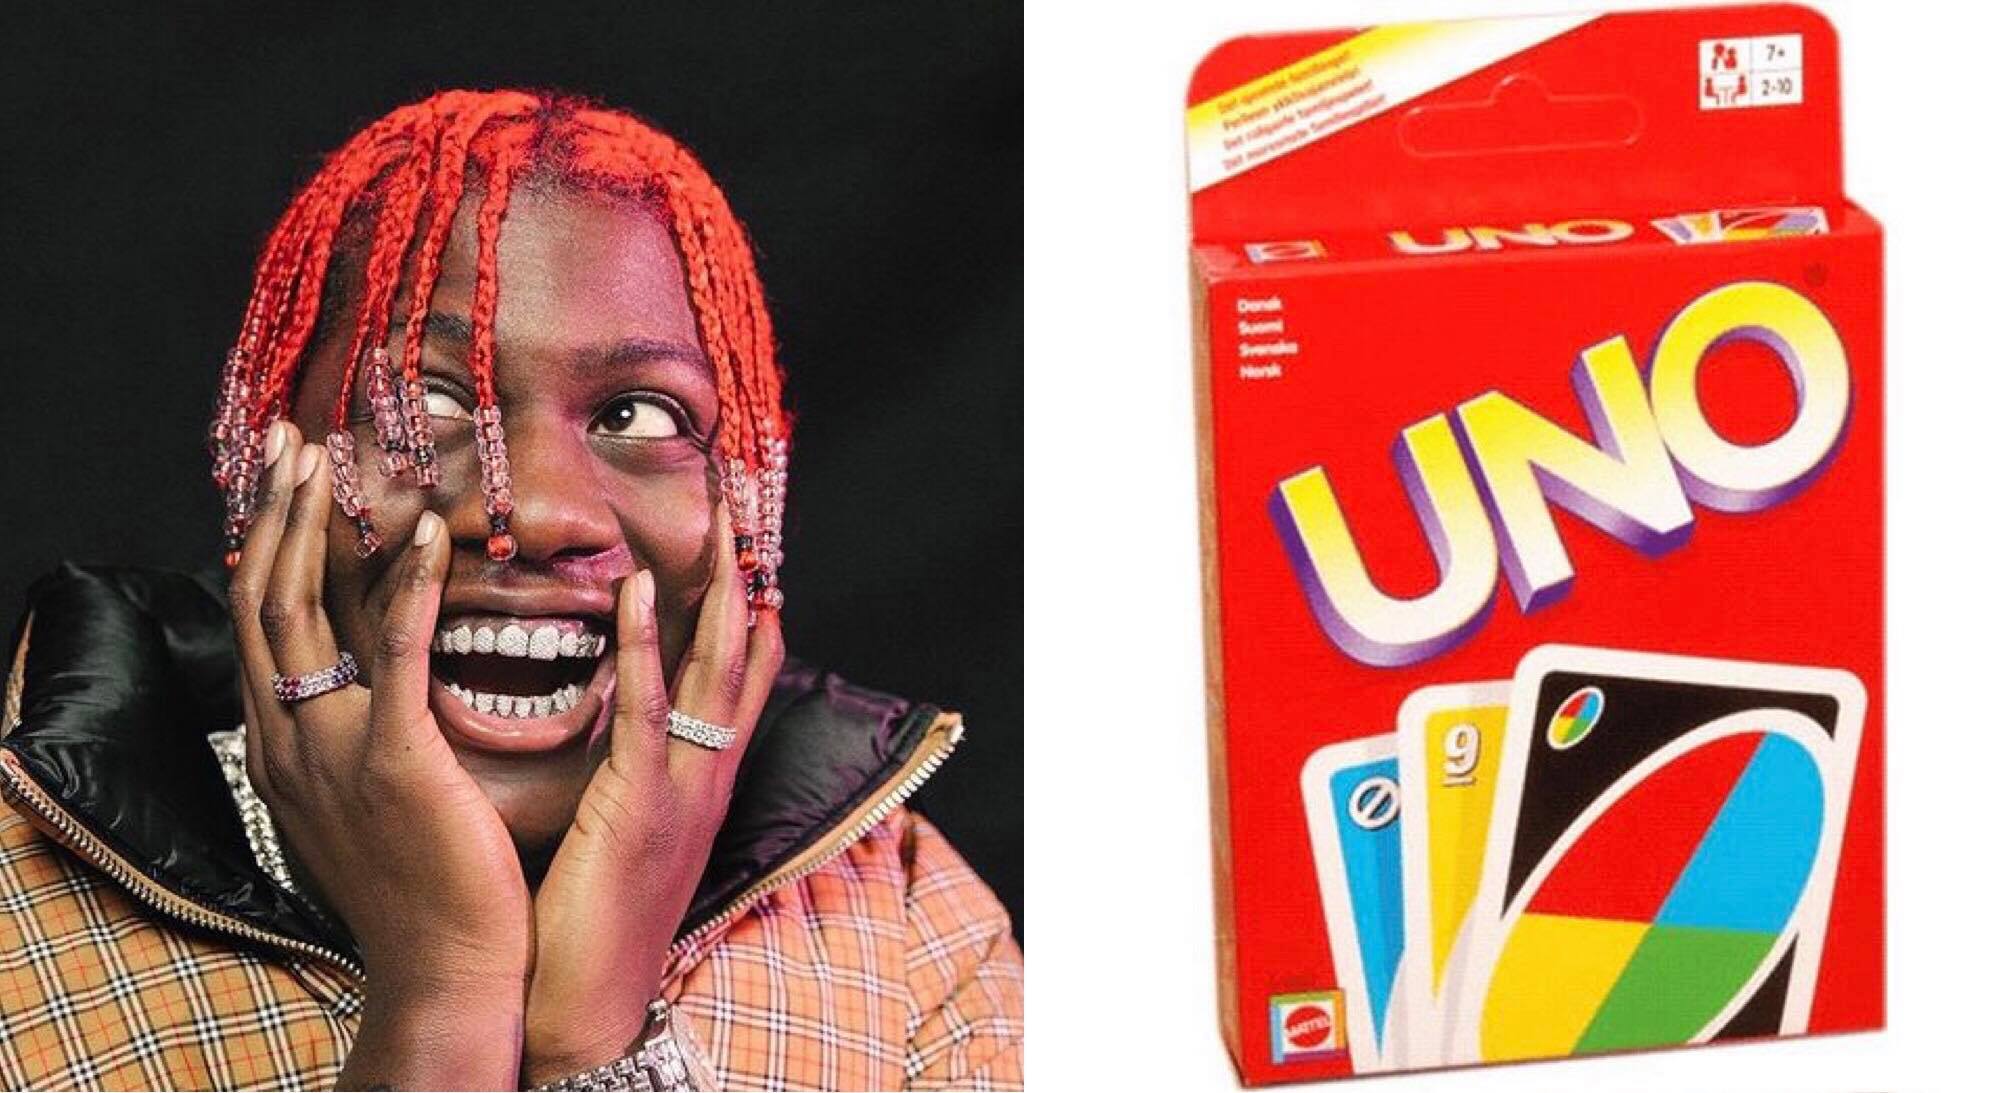 Lil Yachty to produce and star in UNO film adaptation